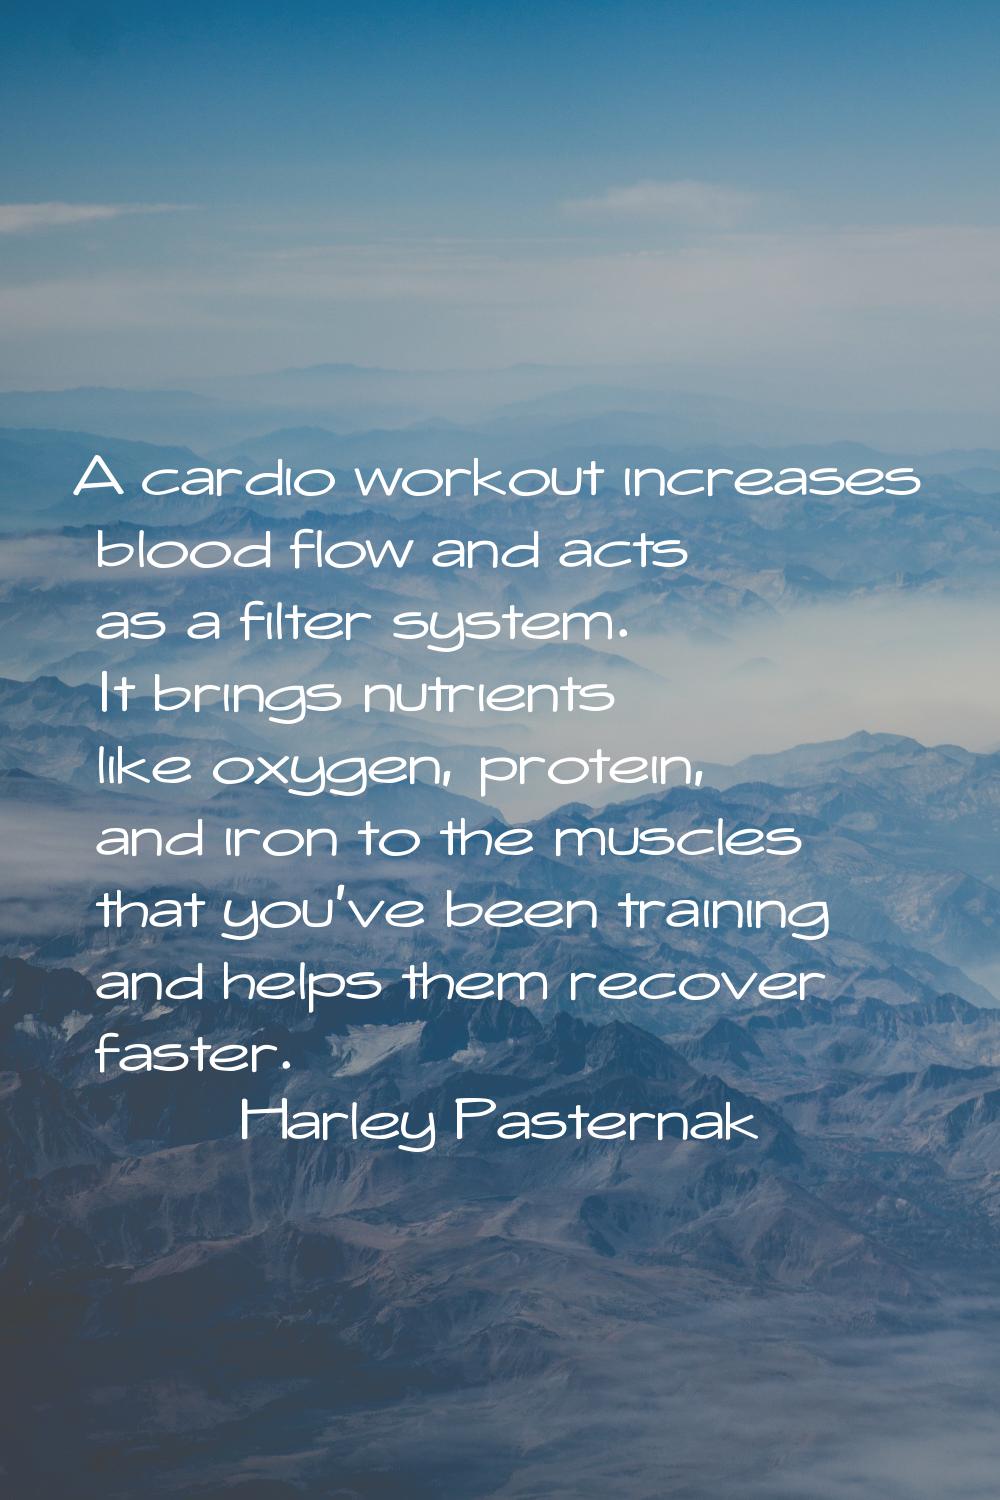 A cardio workout increases blood flow and acts as a filter system. It brings nutrients like oxygen,